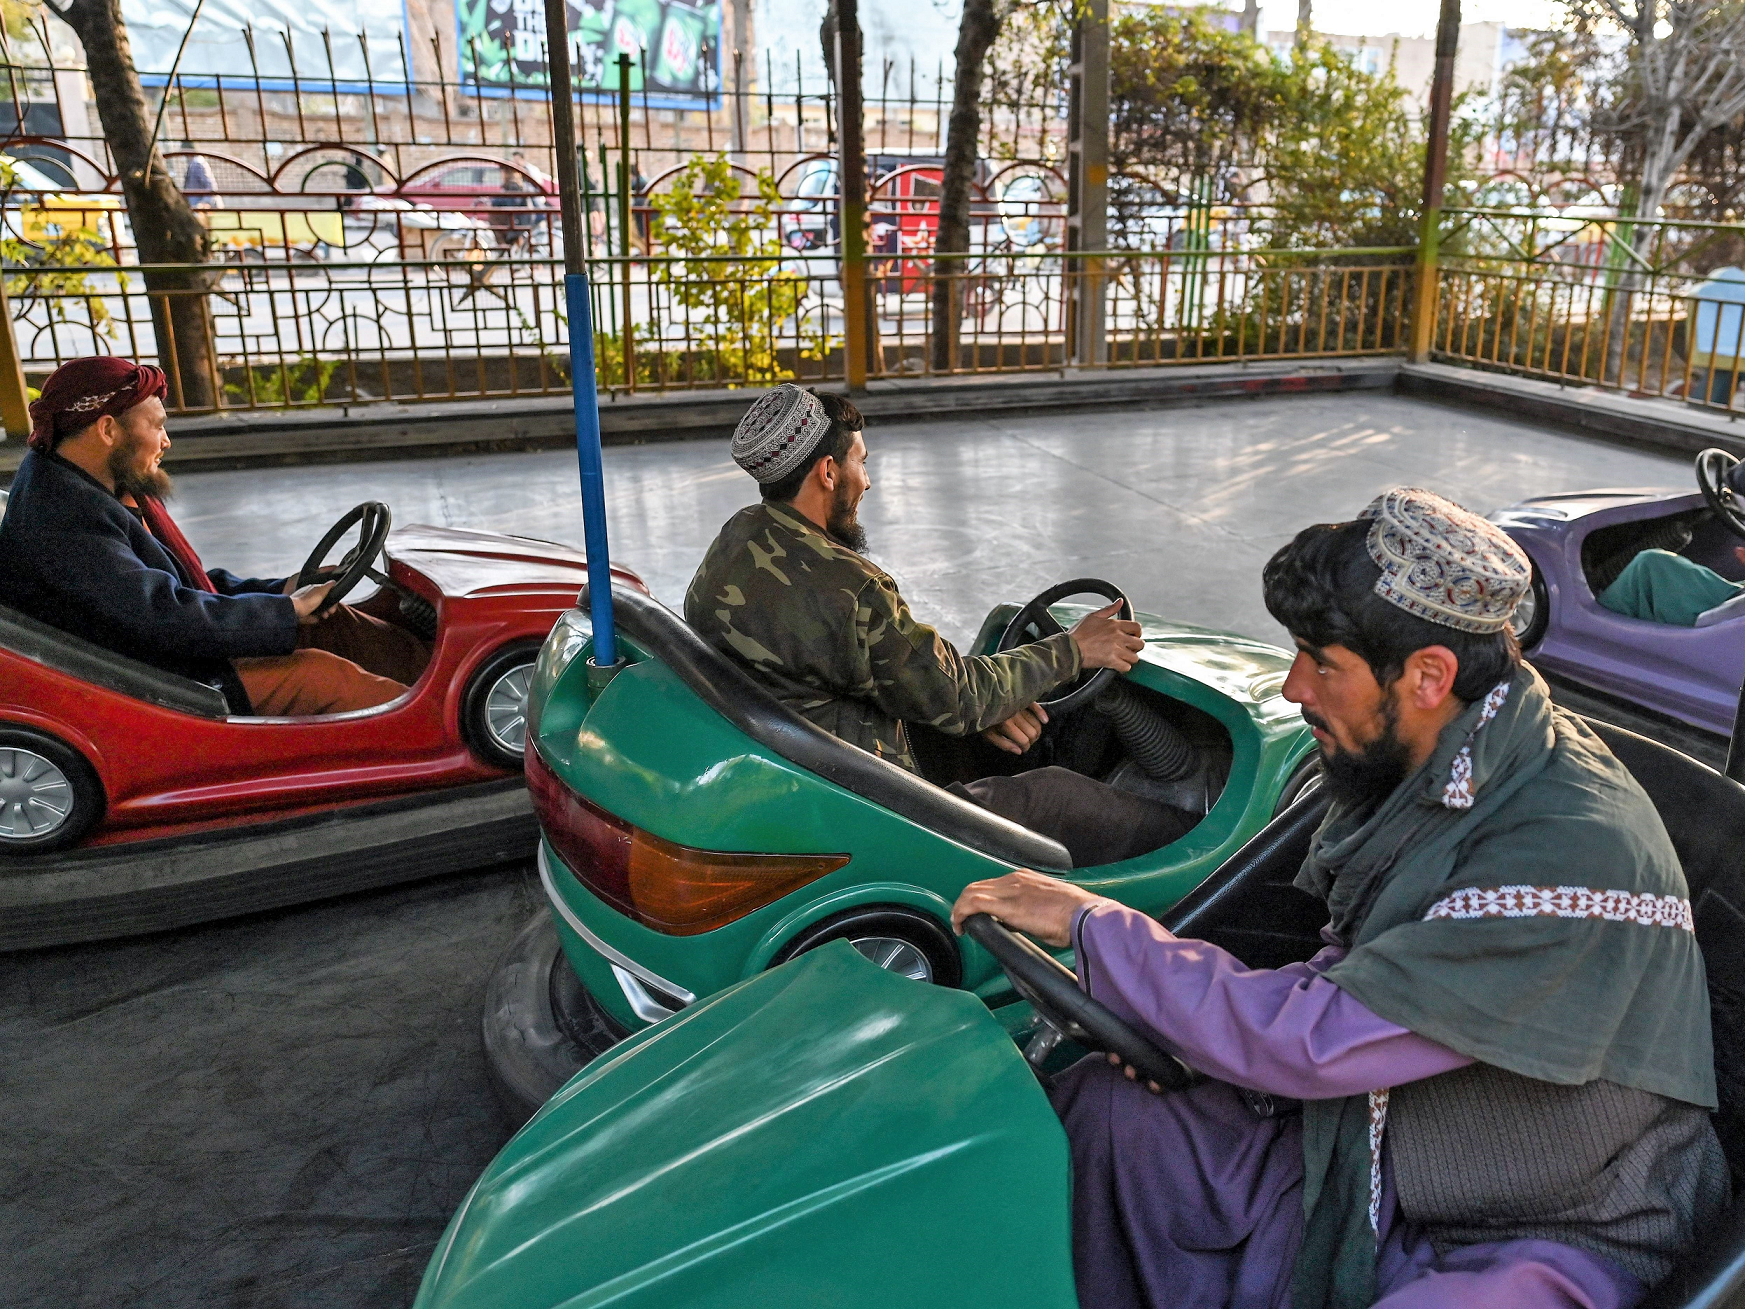 In this picture taken on 23 November, 2021, Taliban fighters ride on bumper cars, while they visit a small amusement park in Herat city, Herat